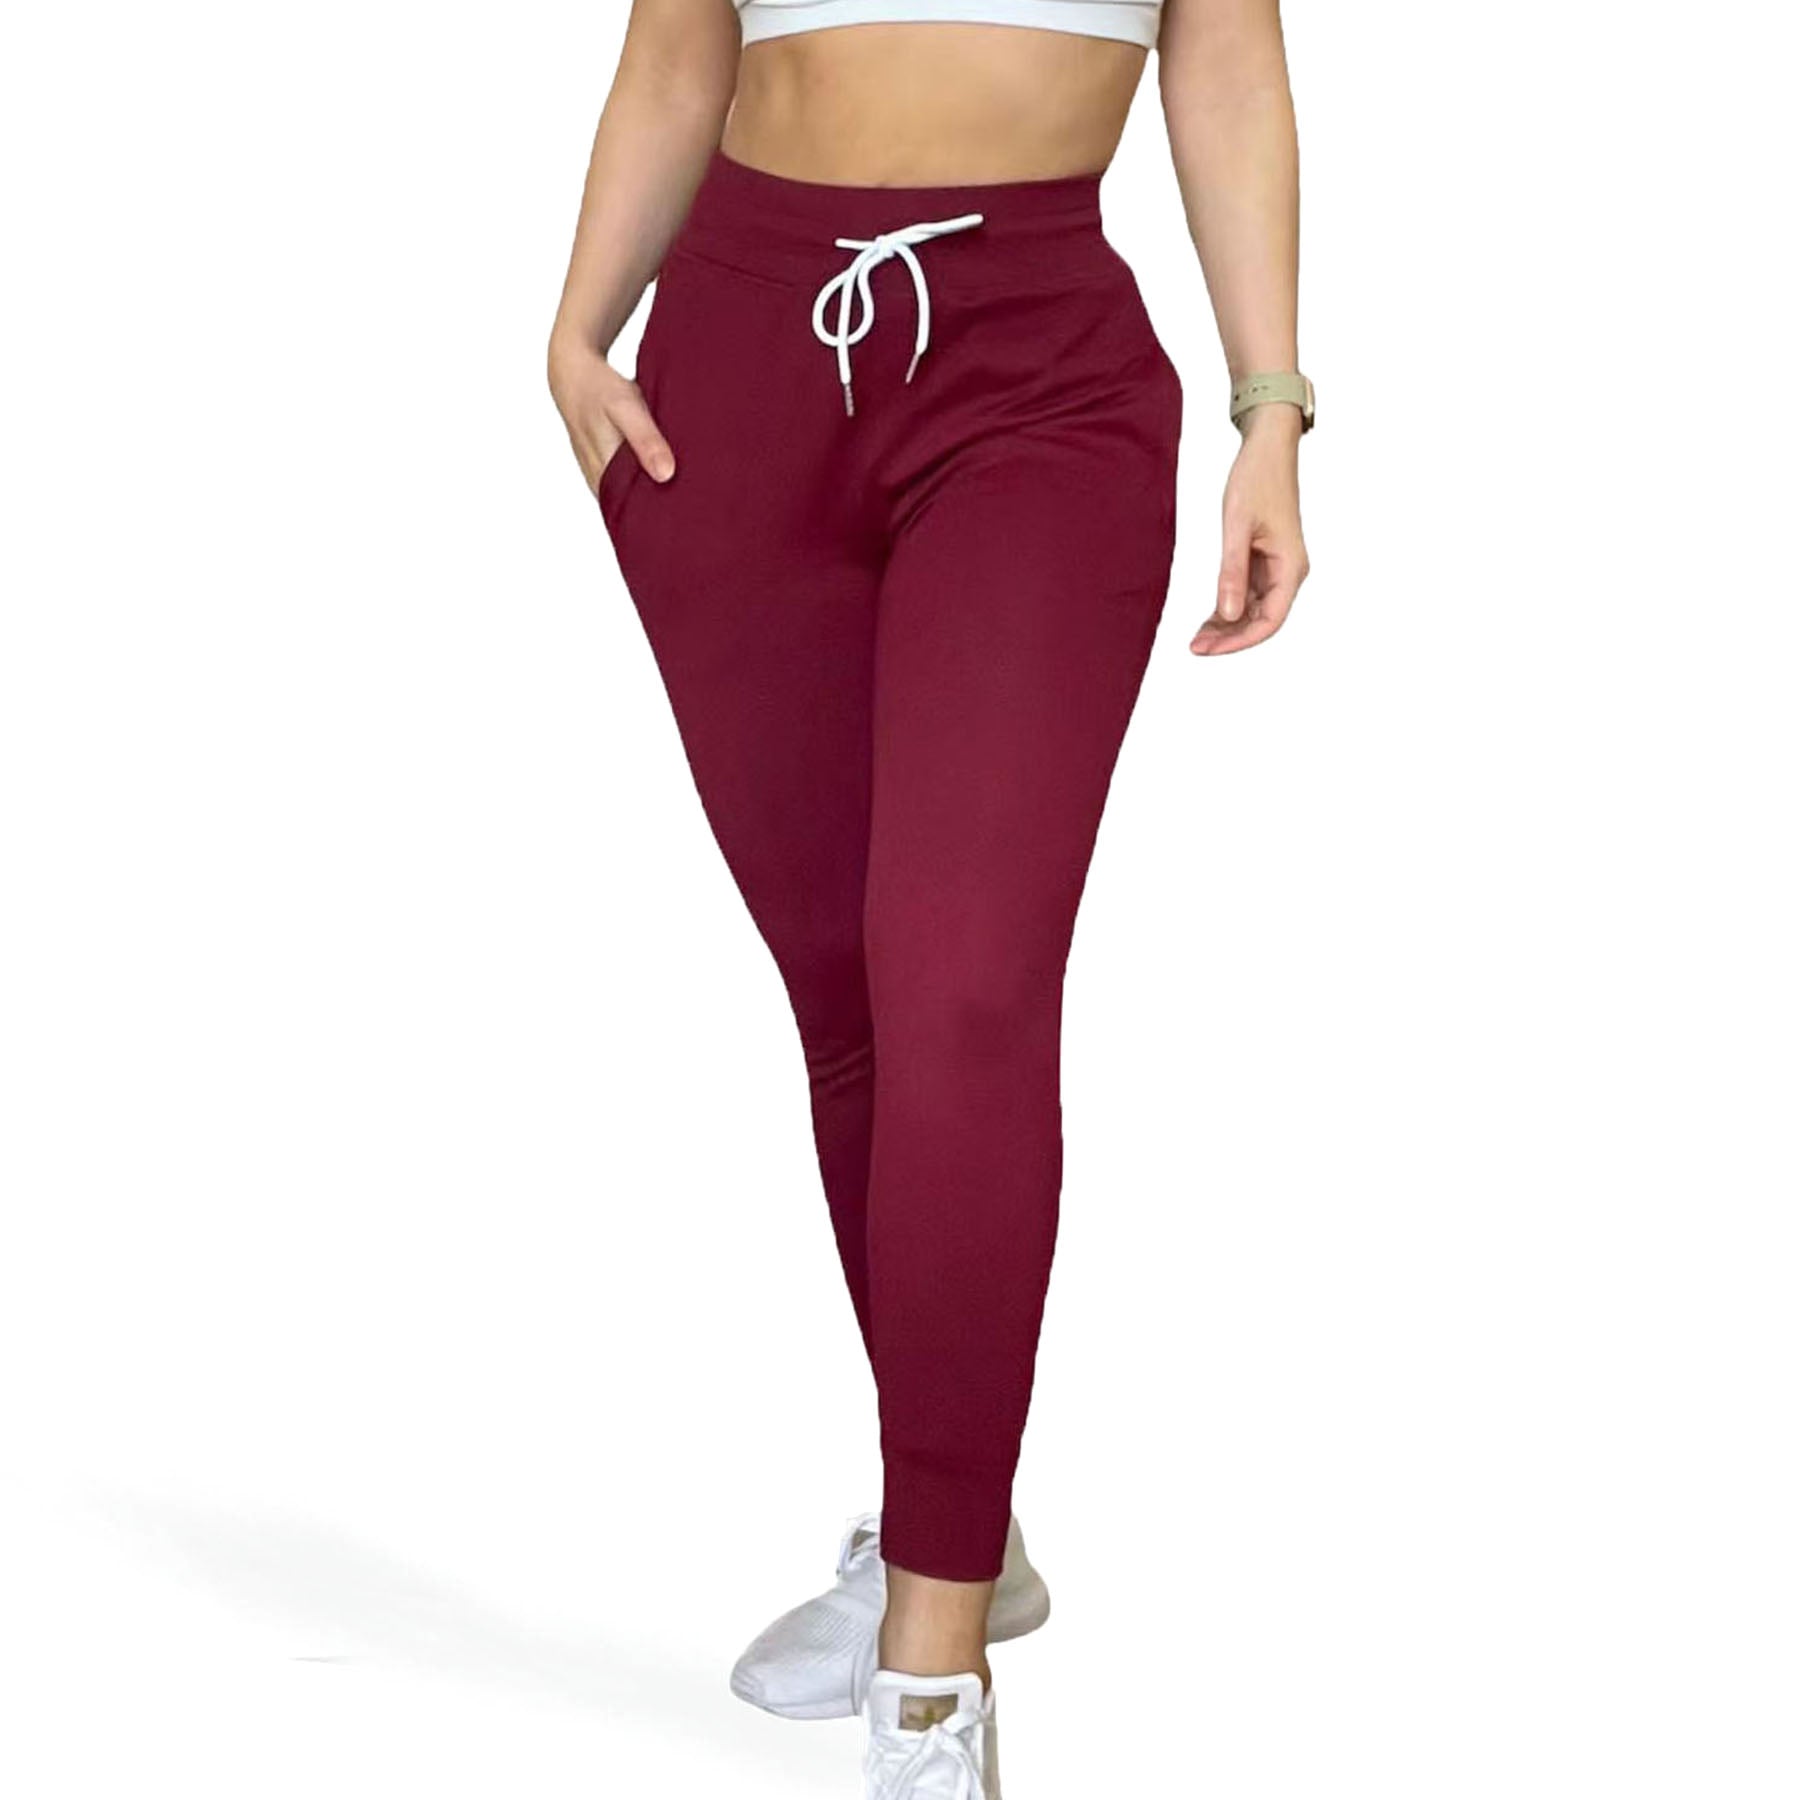 Buy Aoxjox Trinity High Waisted Yoga Pants with Pockets for Women